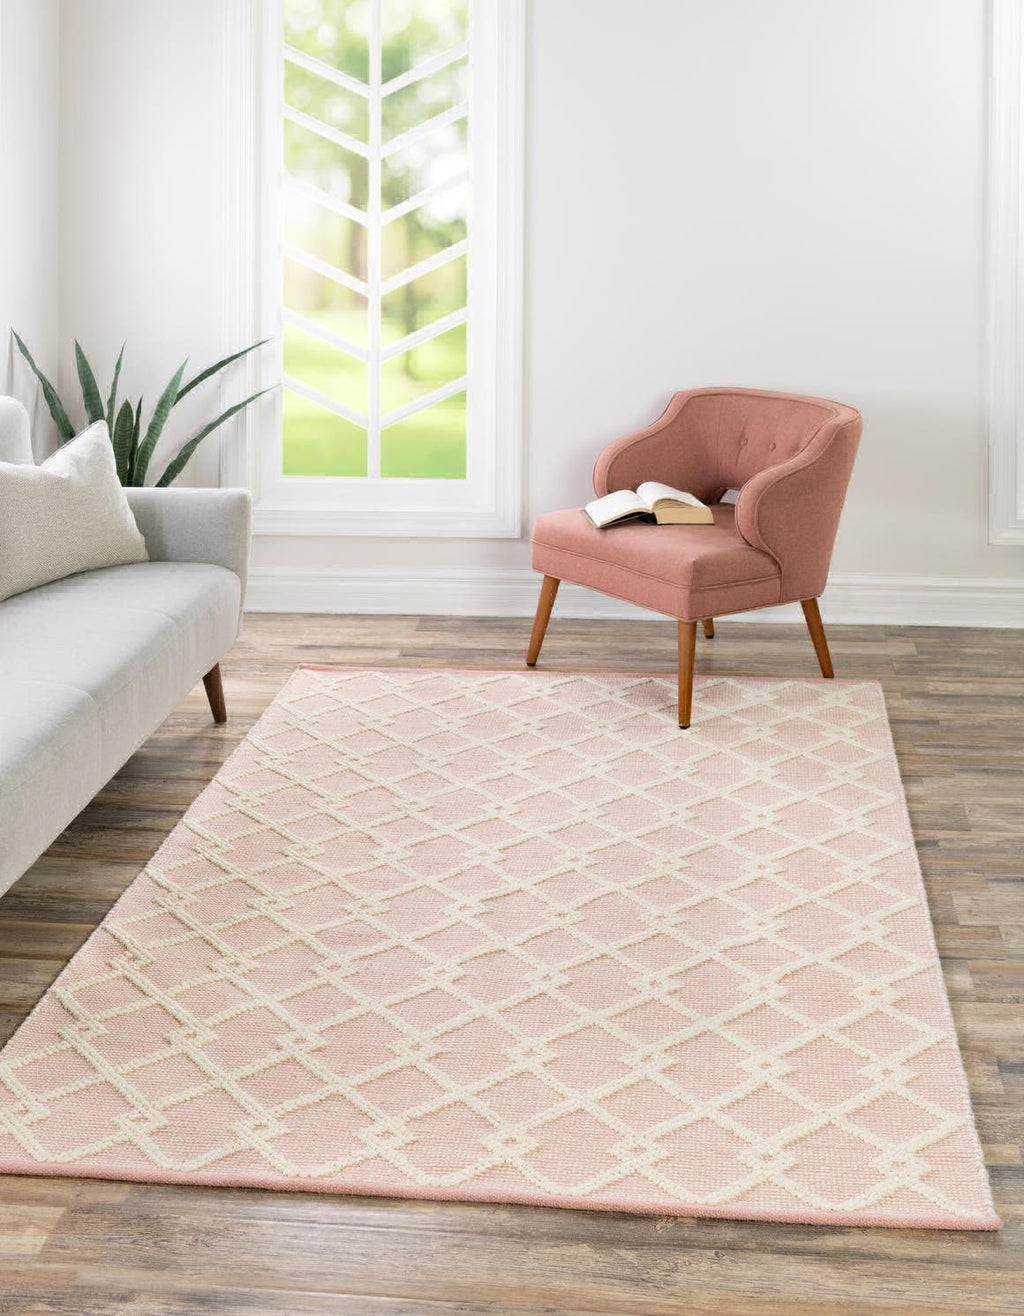 Unique Loom Dorset RET-JZM2 English Rose Area Rug by Jill Zarin 2' 2'' X 3' 1'' Lifestyle Image Feature